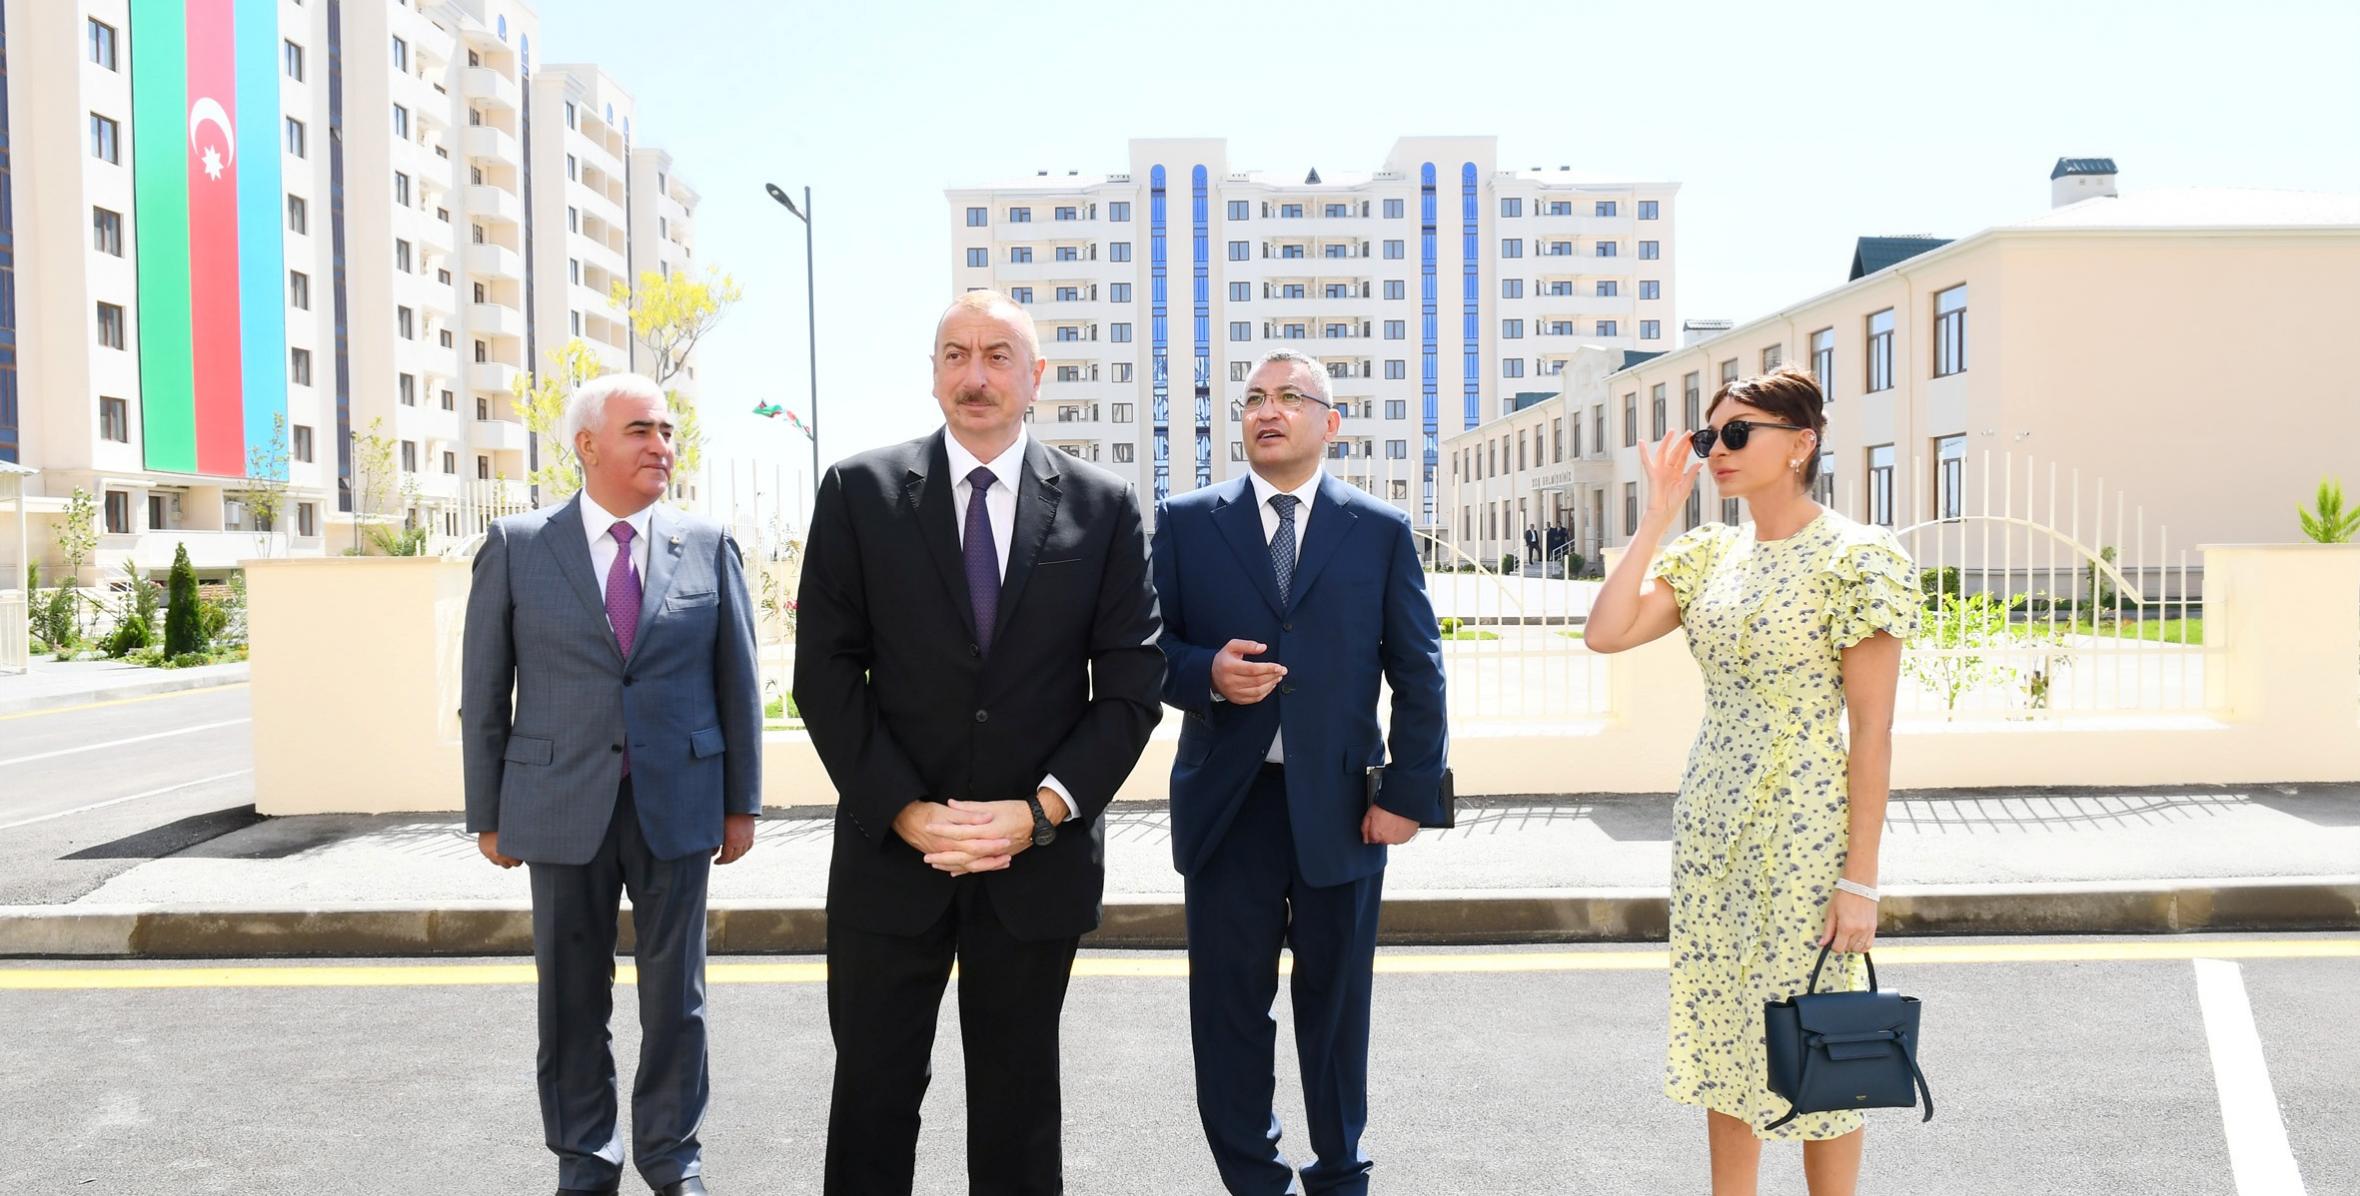 Ilham Aliyev attended opening of new residential complex for IDPs in Pirallahi district, Baku